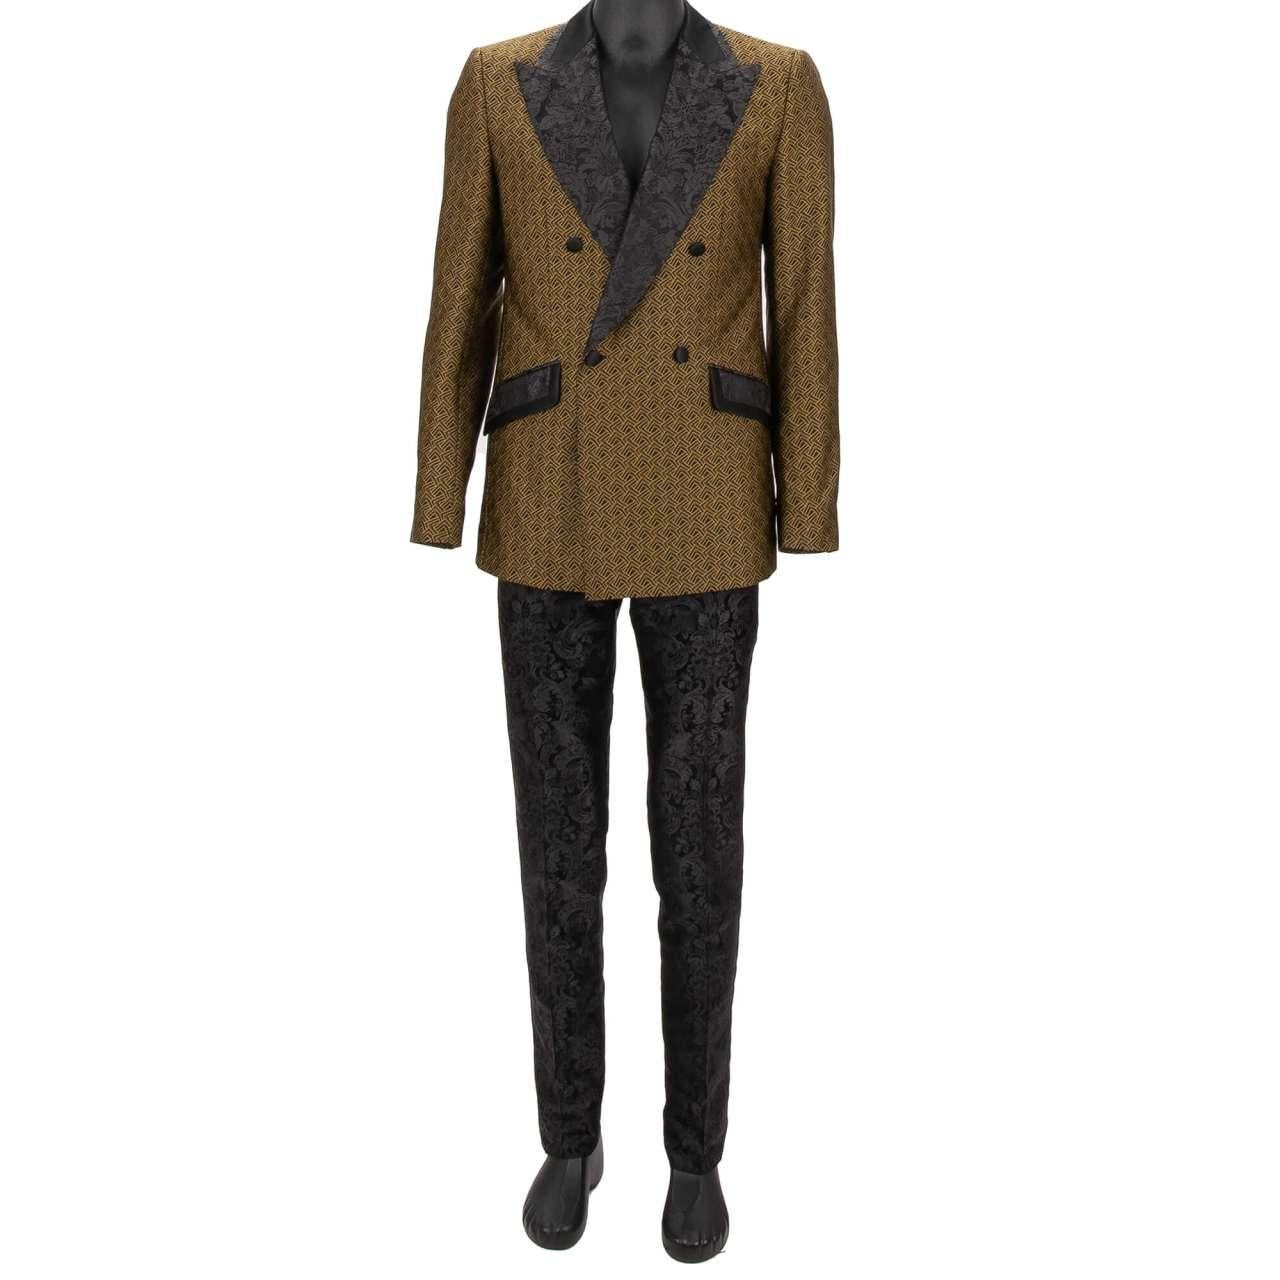 Dolce & Gabbana Baroque Jacquard Double breasted Suit Gold Black 48 US 38 M For Sale 1